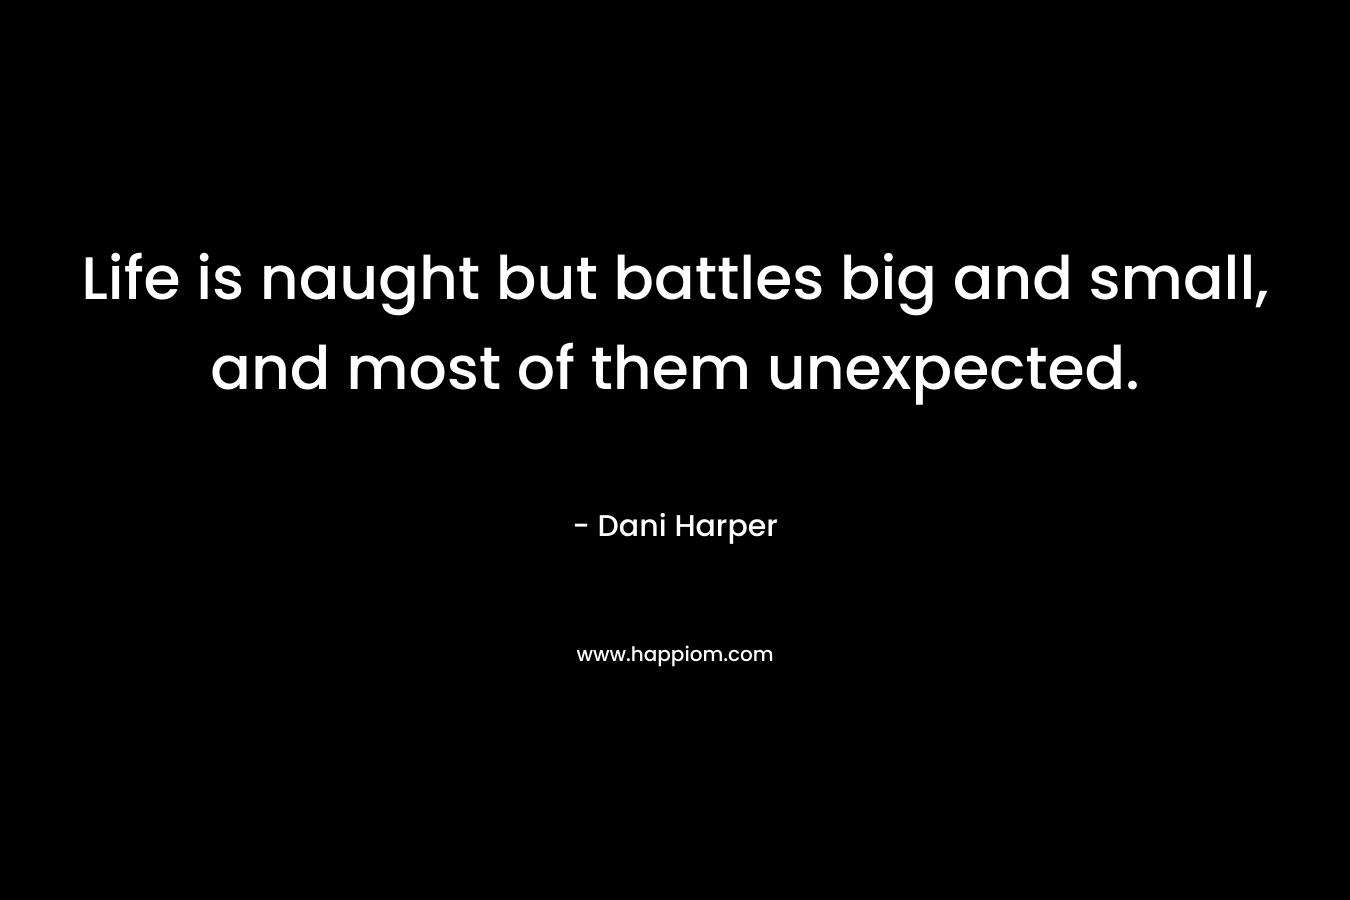 Life is naught but battles big and small, and most of them unexpected. – Dani Harper